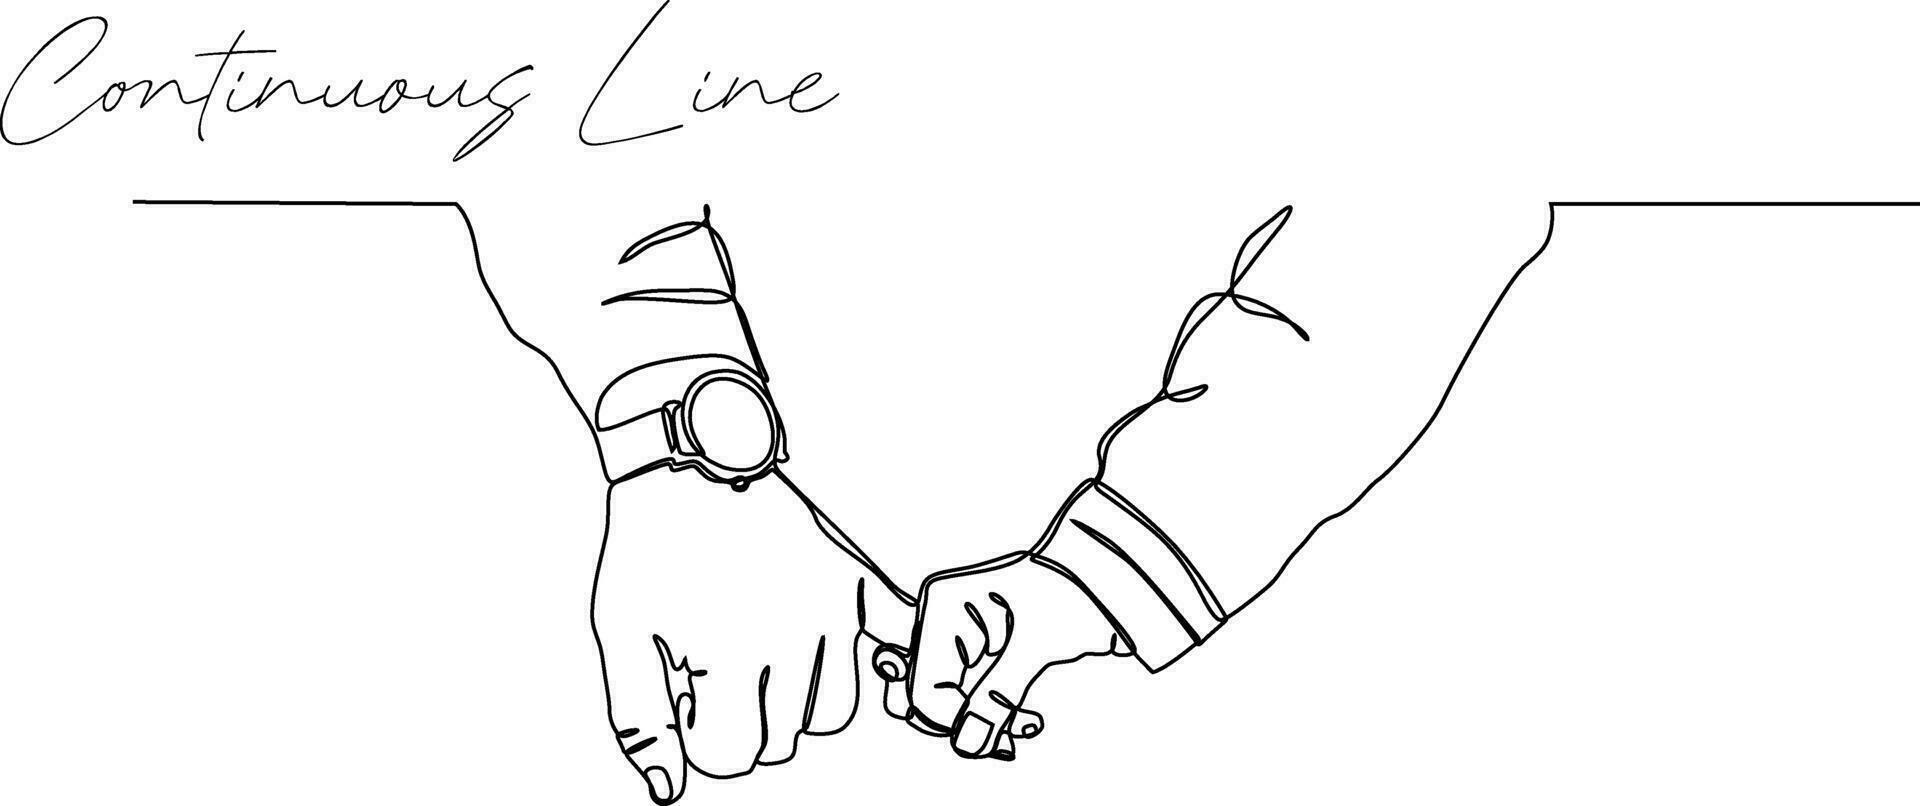 continuous line illustration of hands holding hands vector